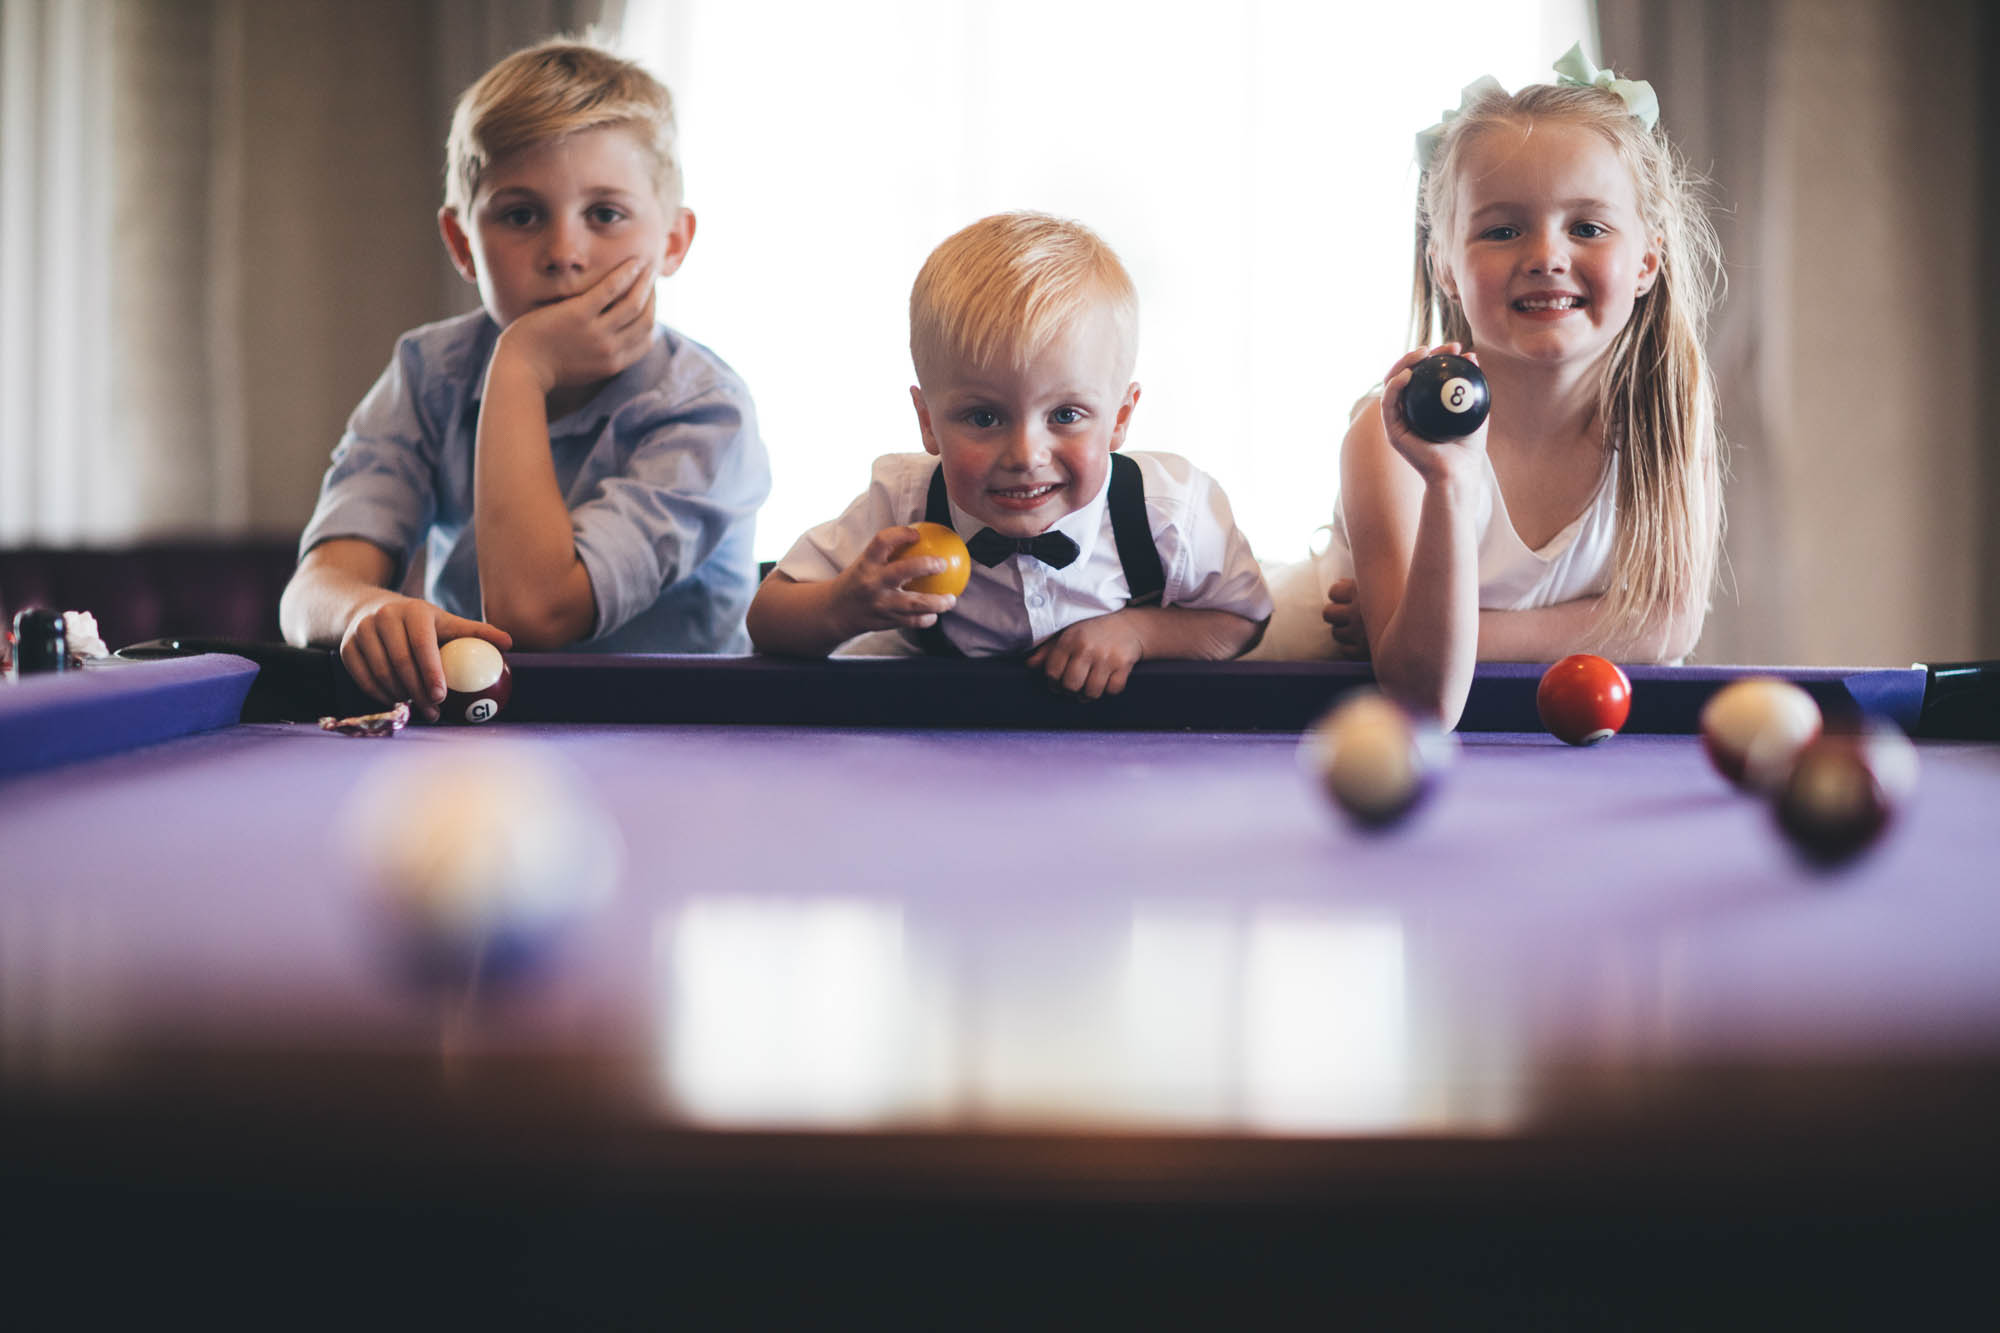 Children smile for the camera at wedding holding pool balls